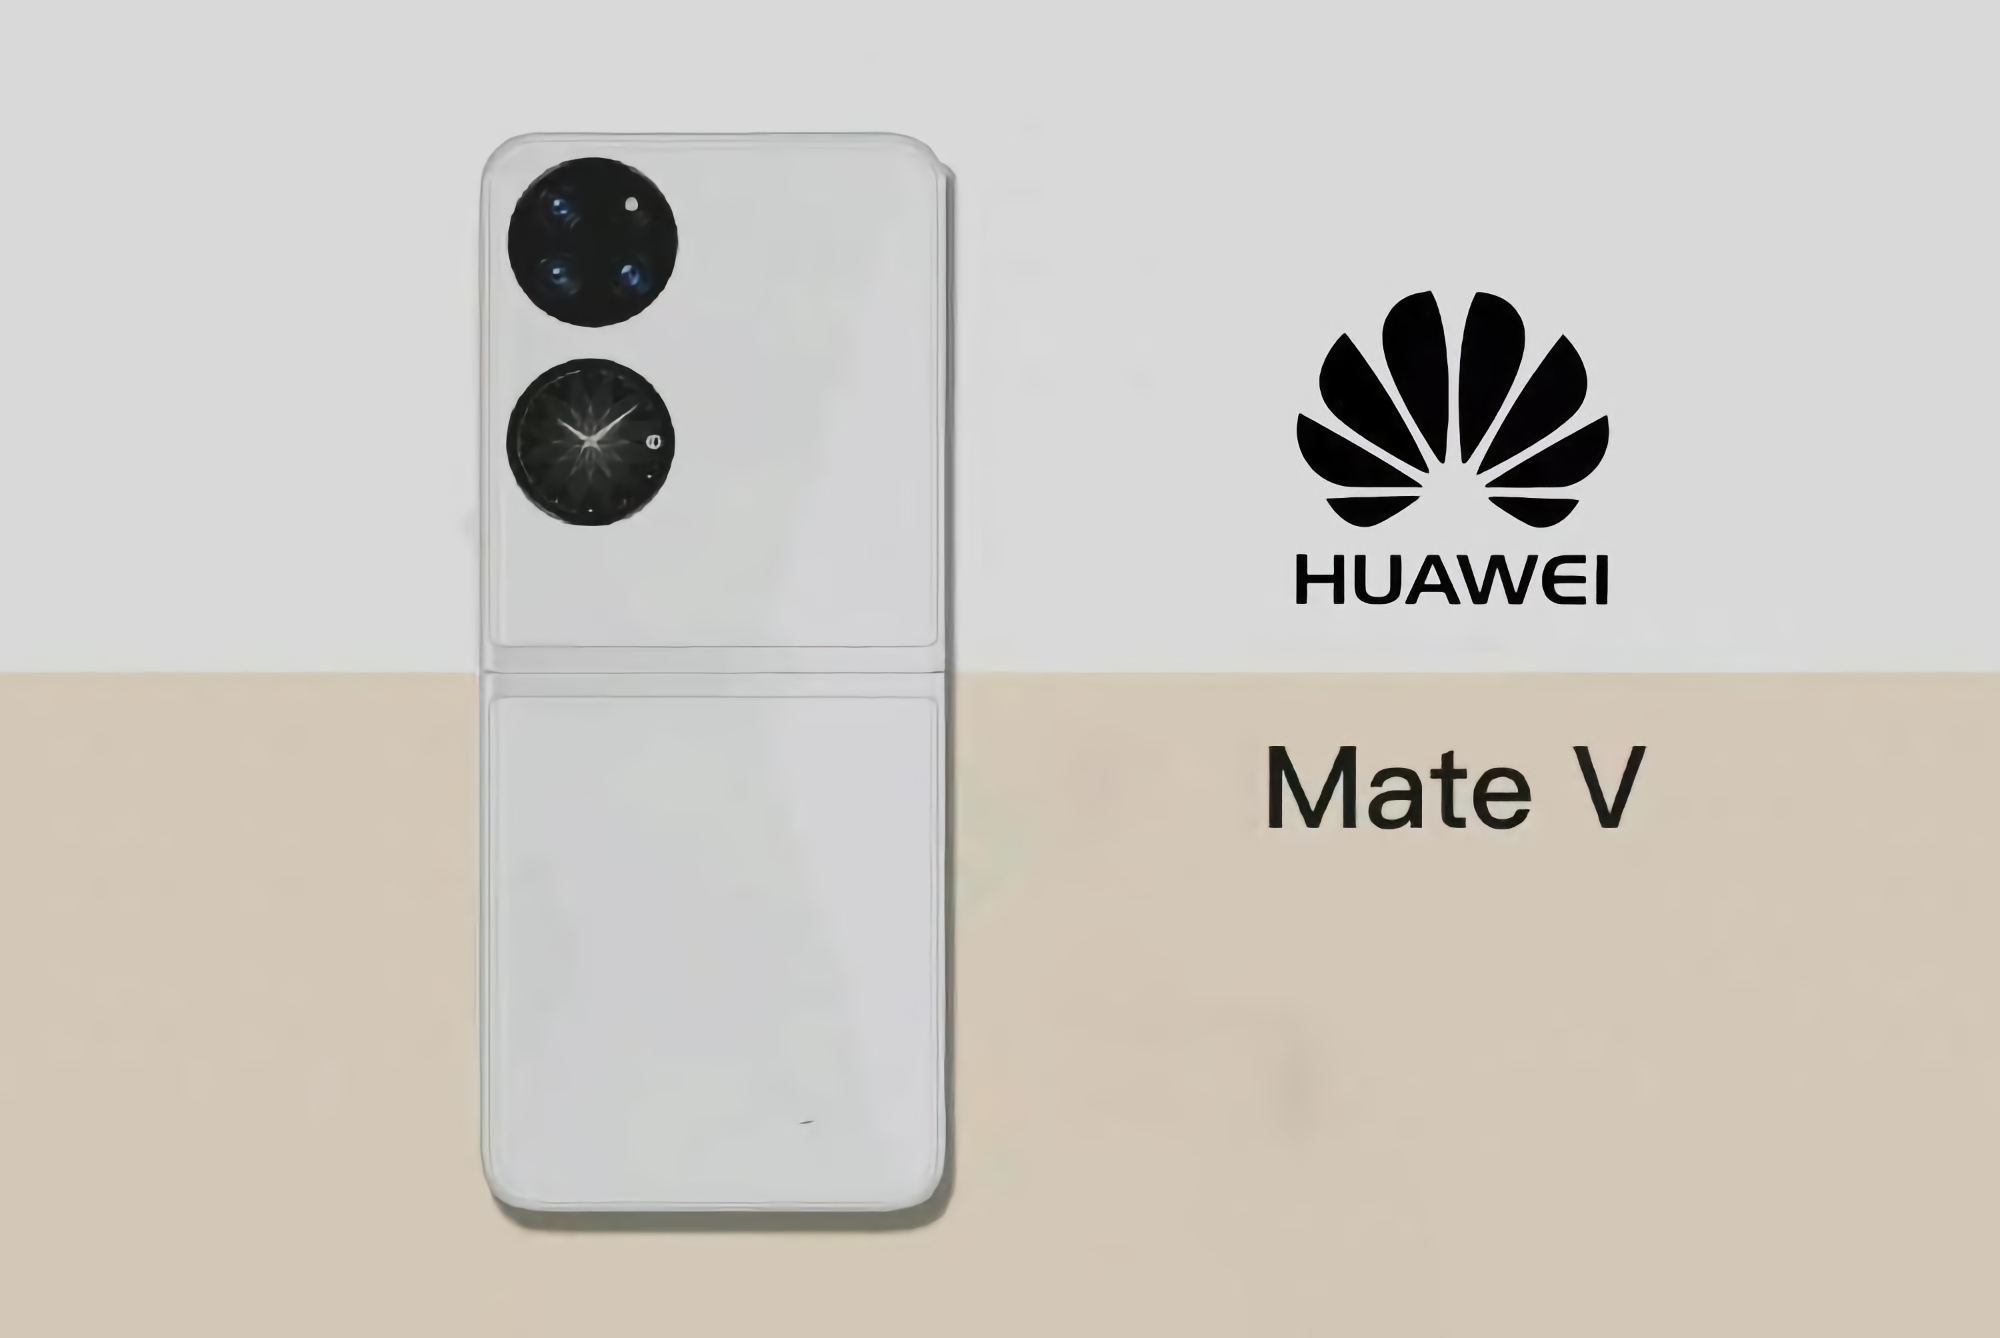 An insider told how the "clamshell" Huawei Mate V will be better than the Samsung Galaxy Z Flip 3